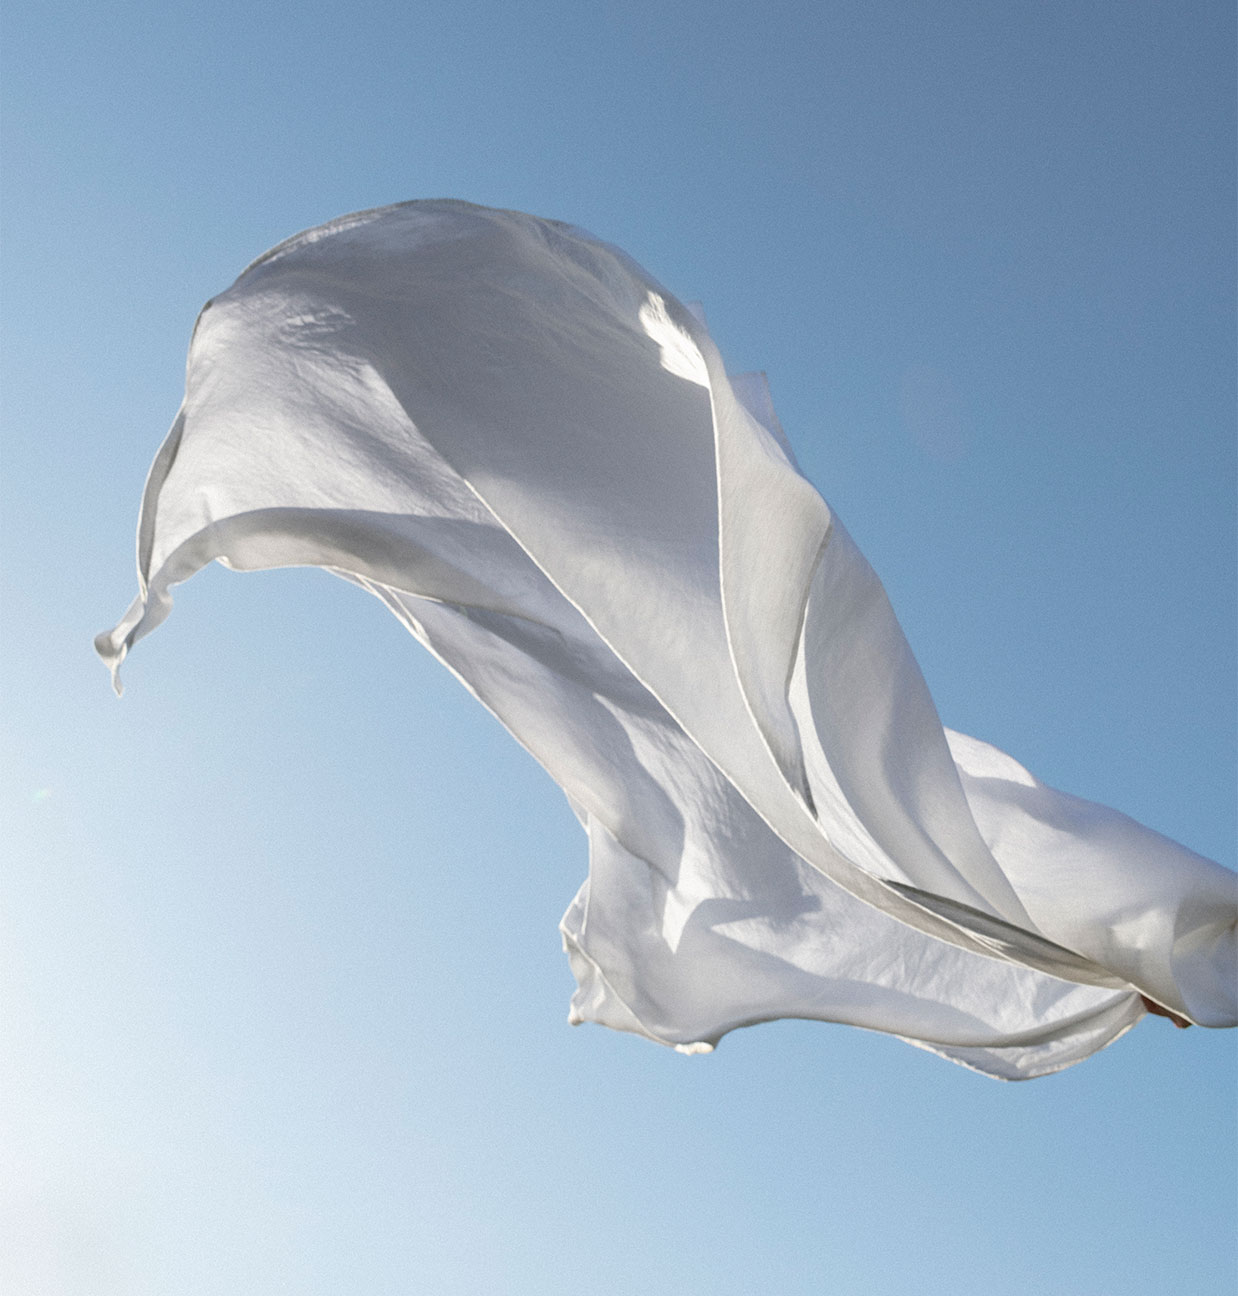 A white linen sheet blows in the wind, against the backdrop of a clear blue sky